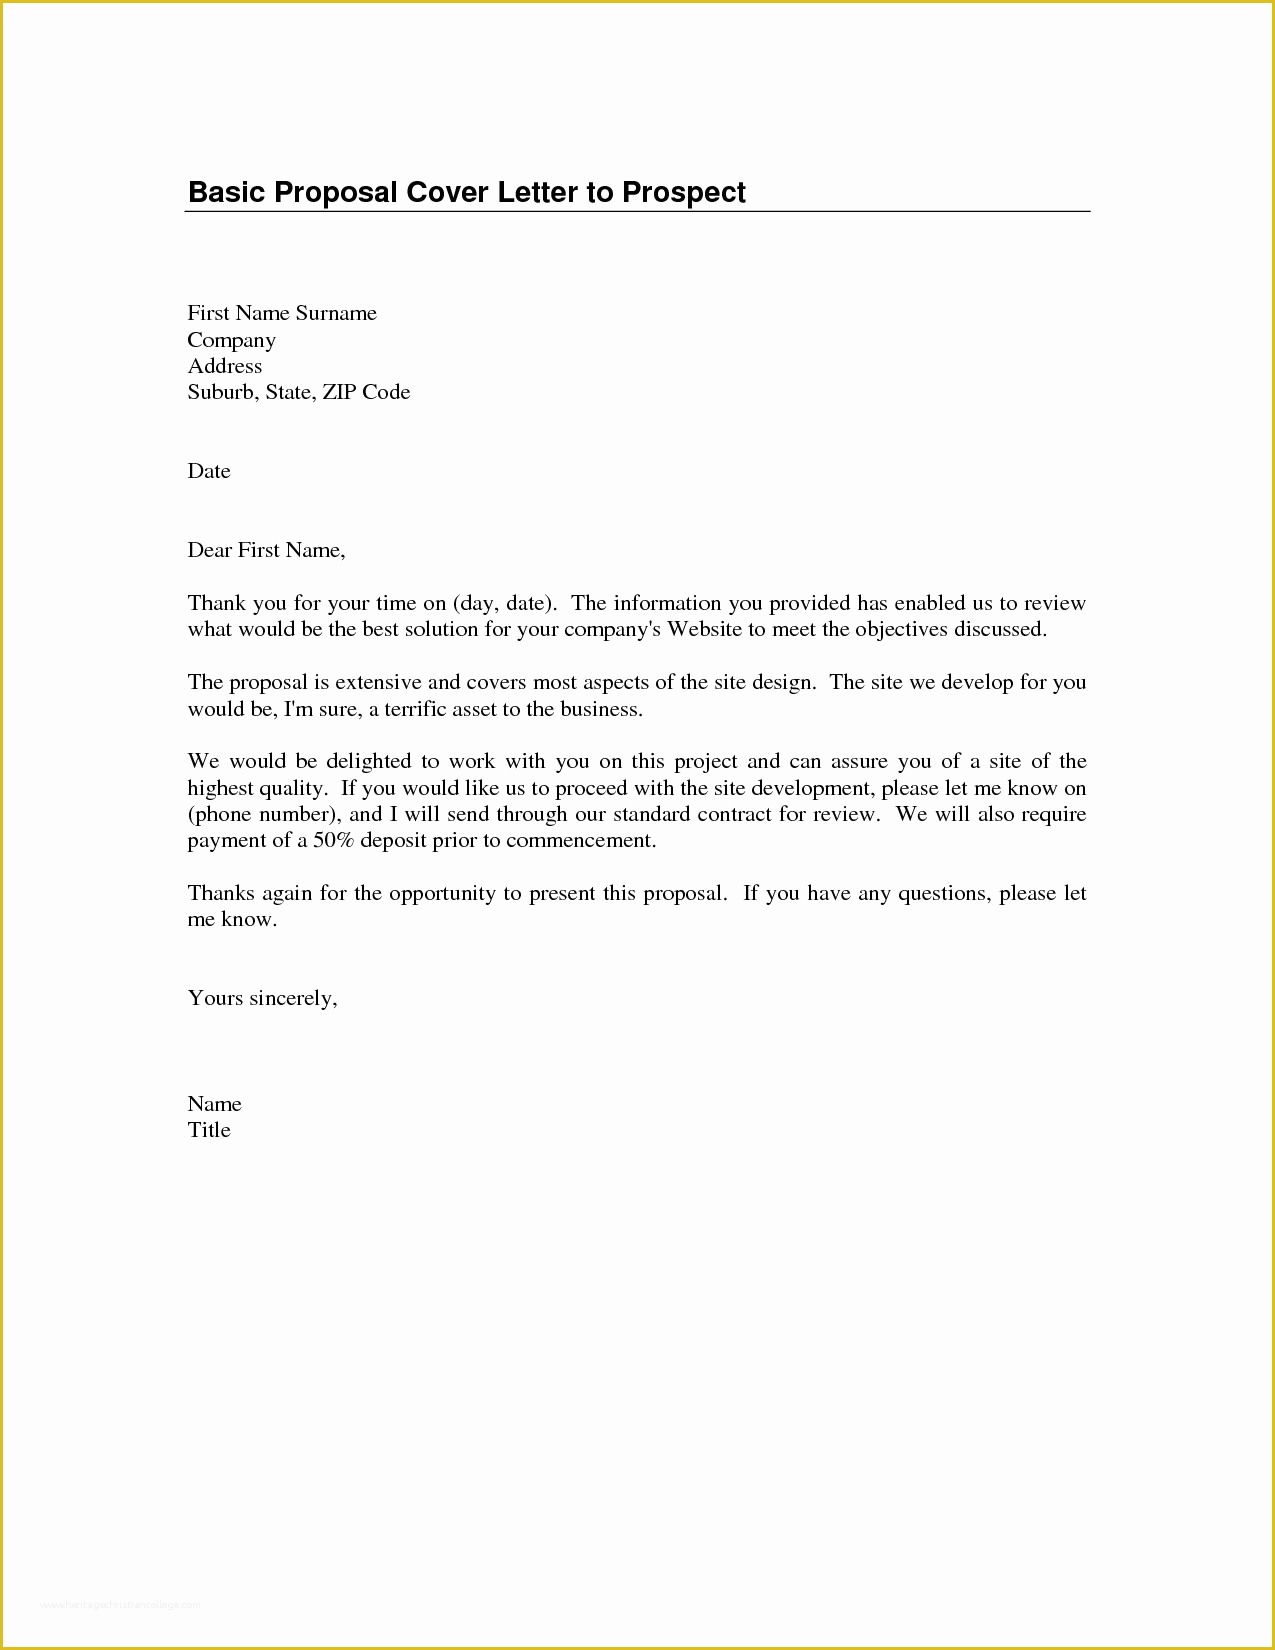 Simple Cover Letter Template Free Of Basic Cover Letter Sample Basic Cover Letters Free